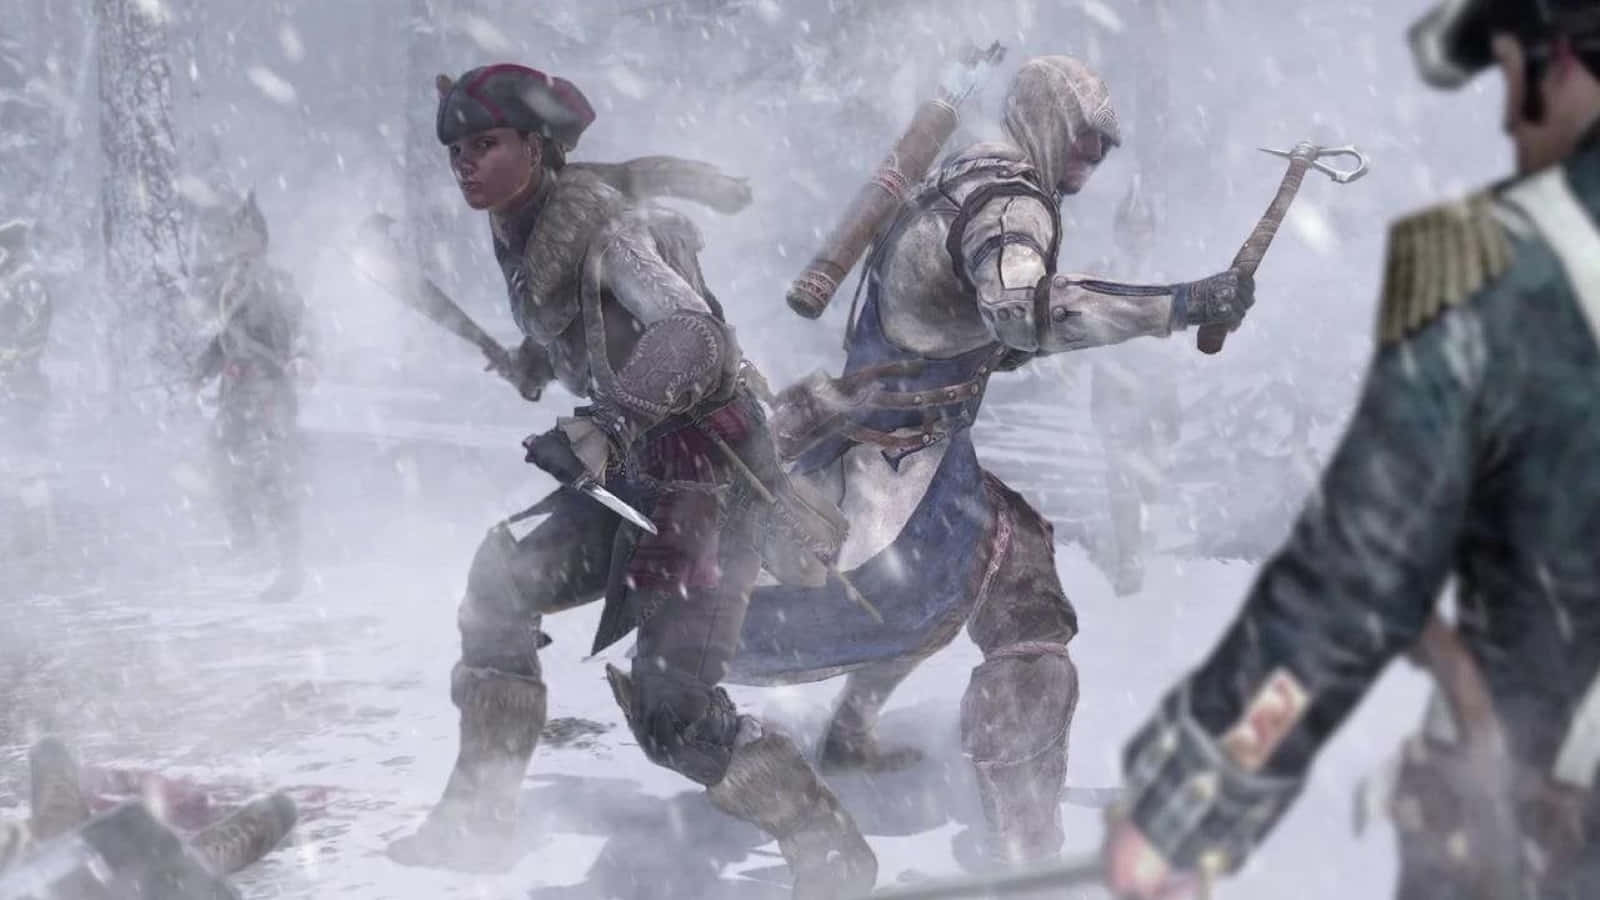 Connor Kenway, fearless Assassin in action Wallpaper